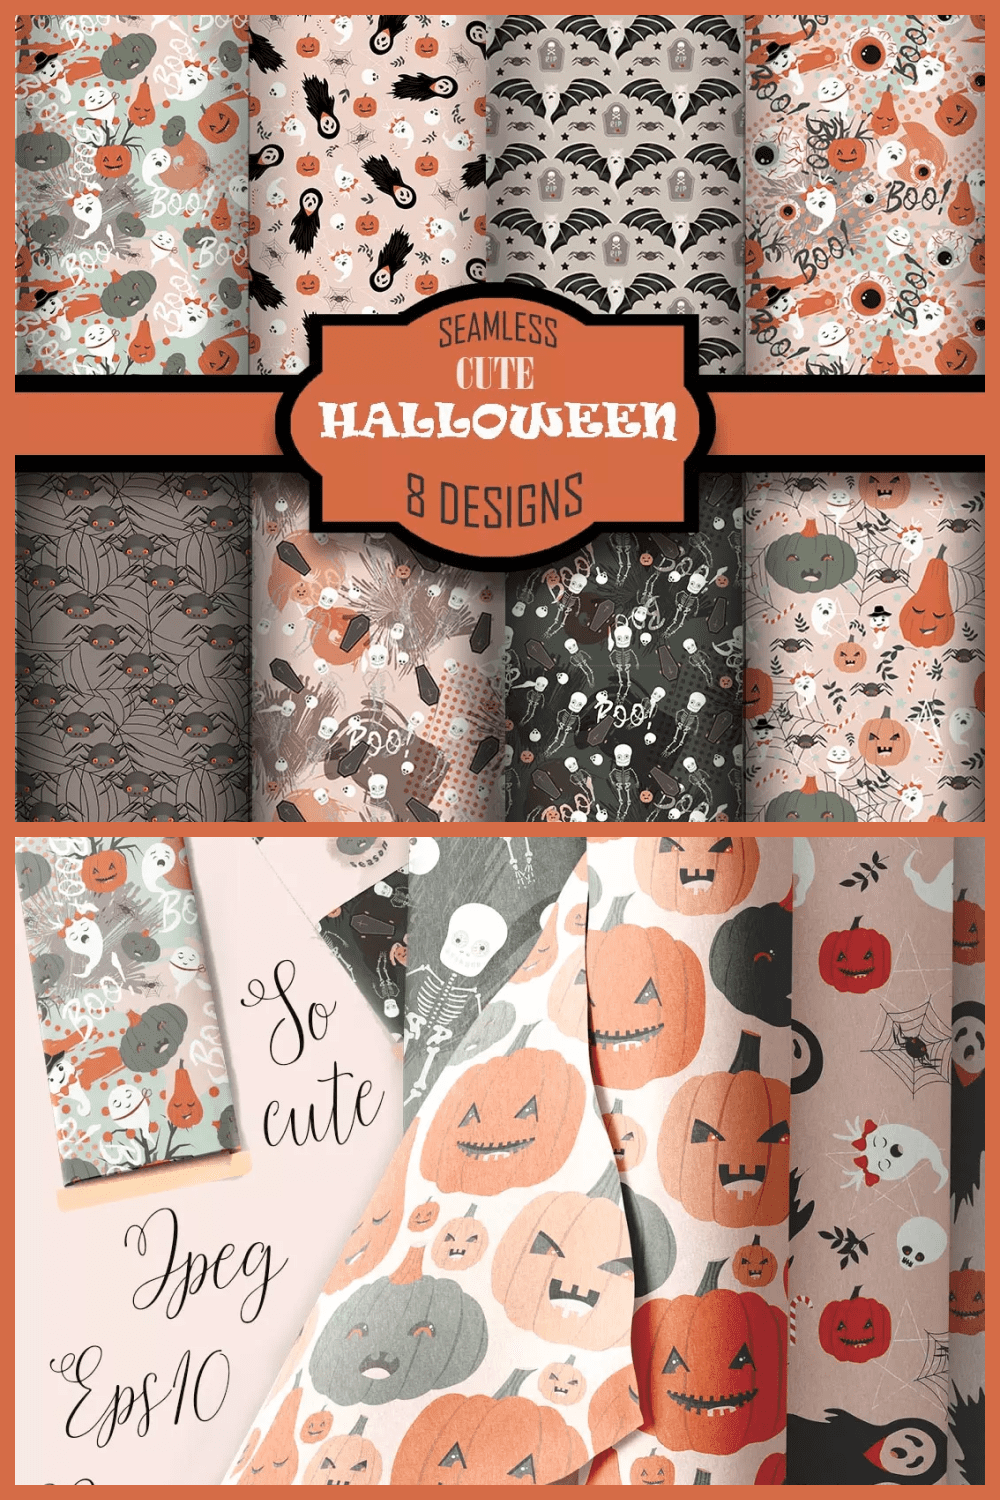 Collage of rolls of wrapping paper with Halloween symbols in pastel colors.